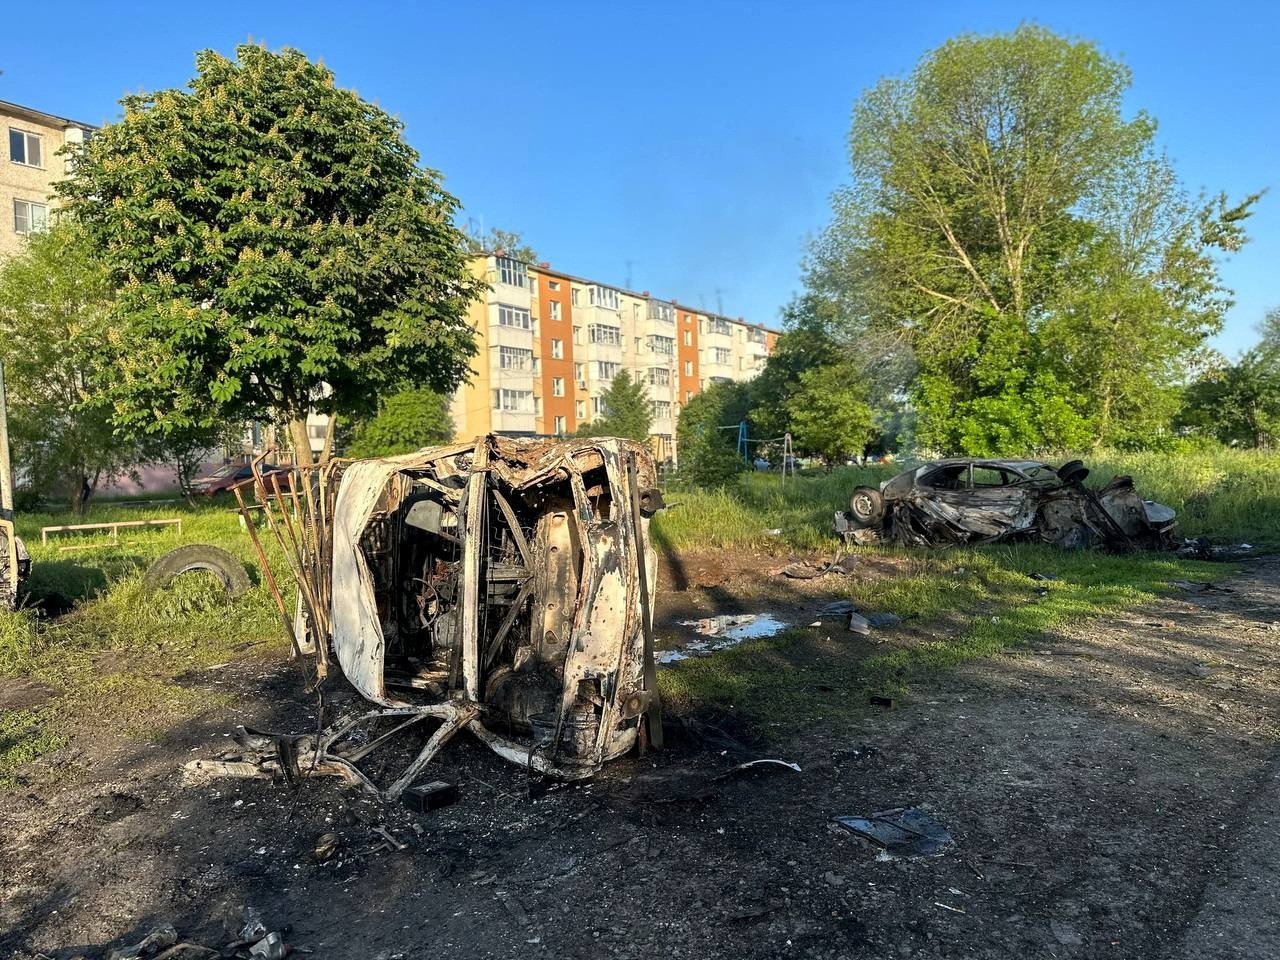 Destroyed vehicles are seen following a Ukrainian forces&#039; shelling in the course of the Russia-Ukraine conflict in the town of Shebekino in the Belgorod region, Russia, May 31, 2023. (Reuters Photo)